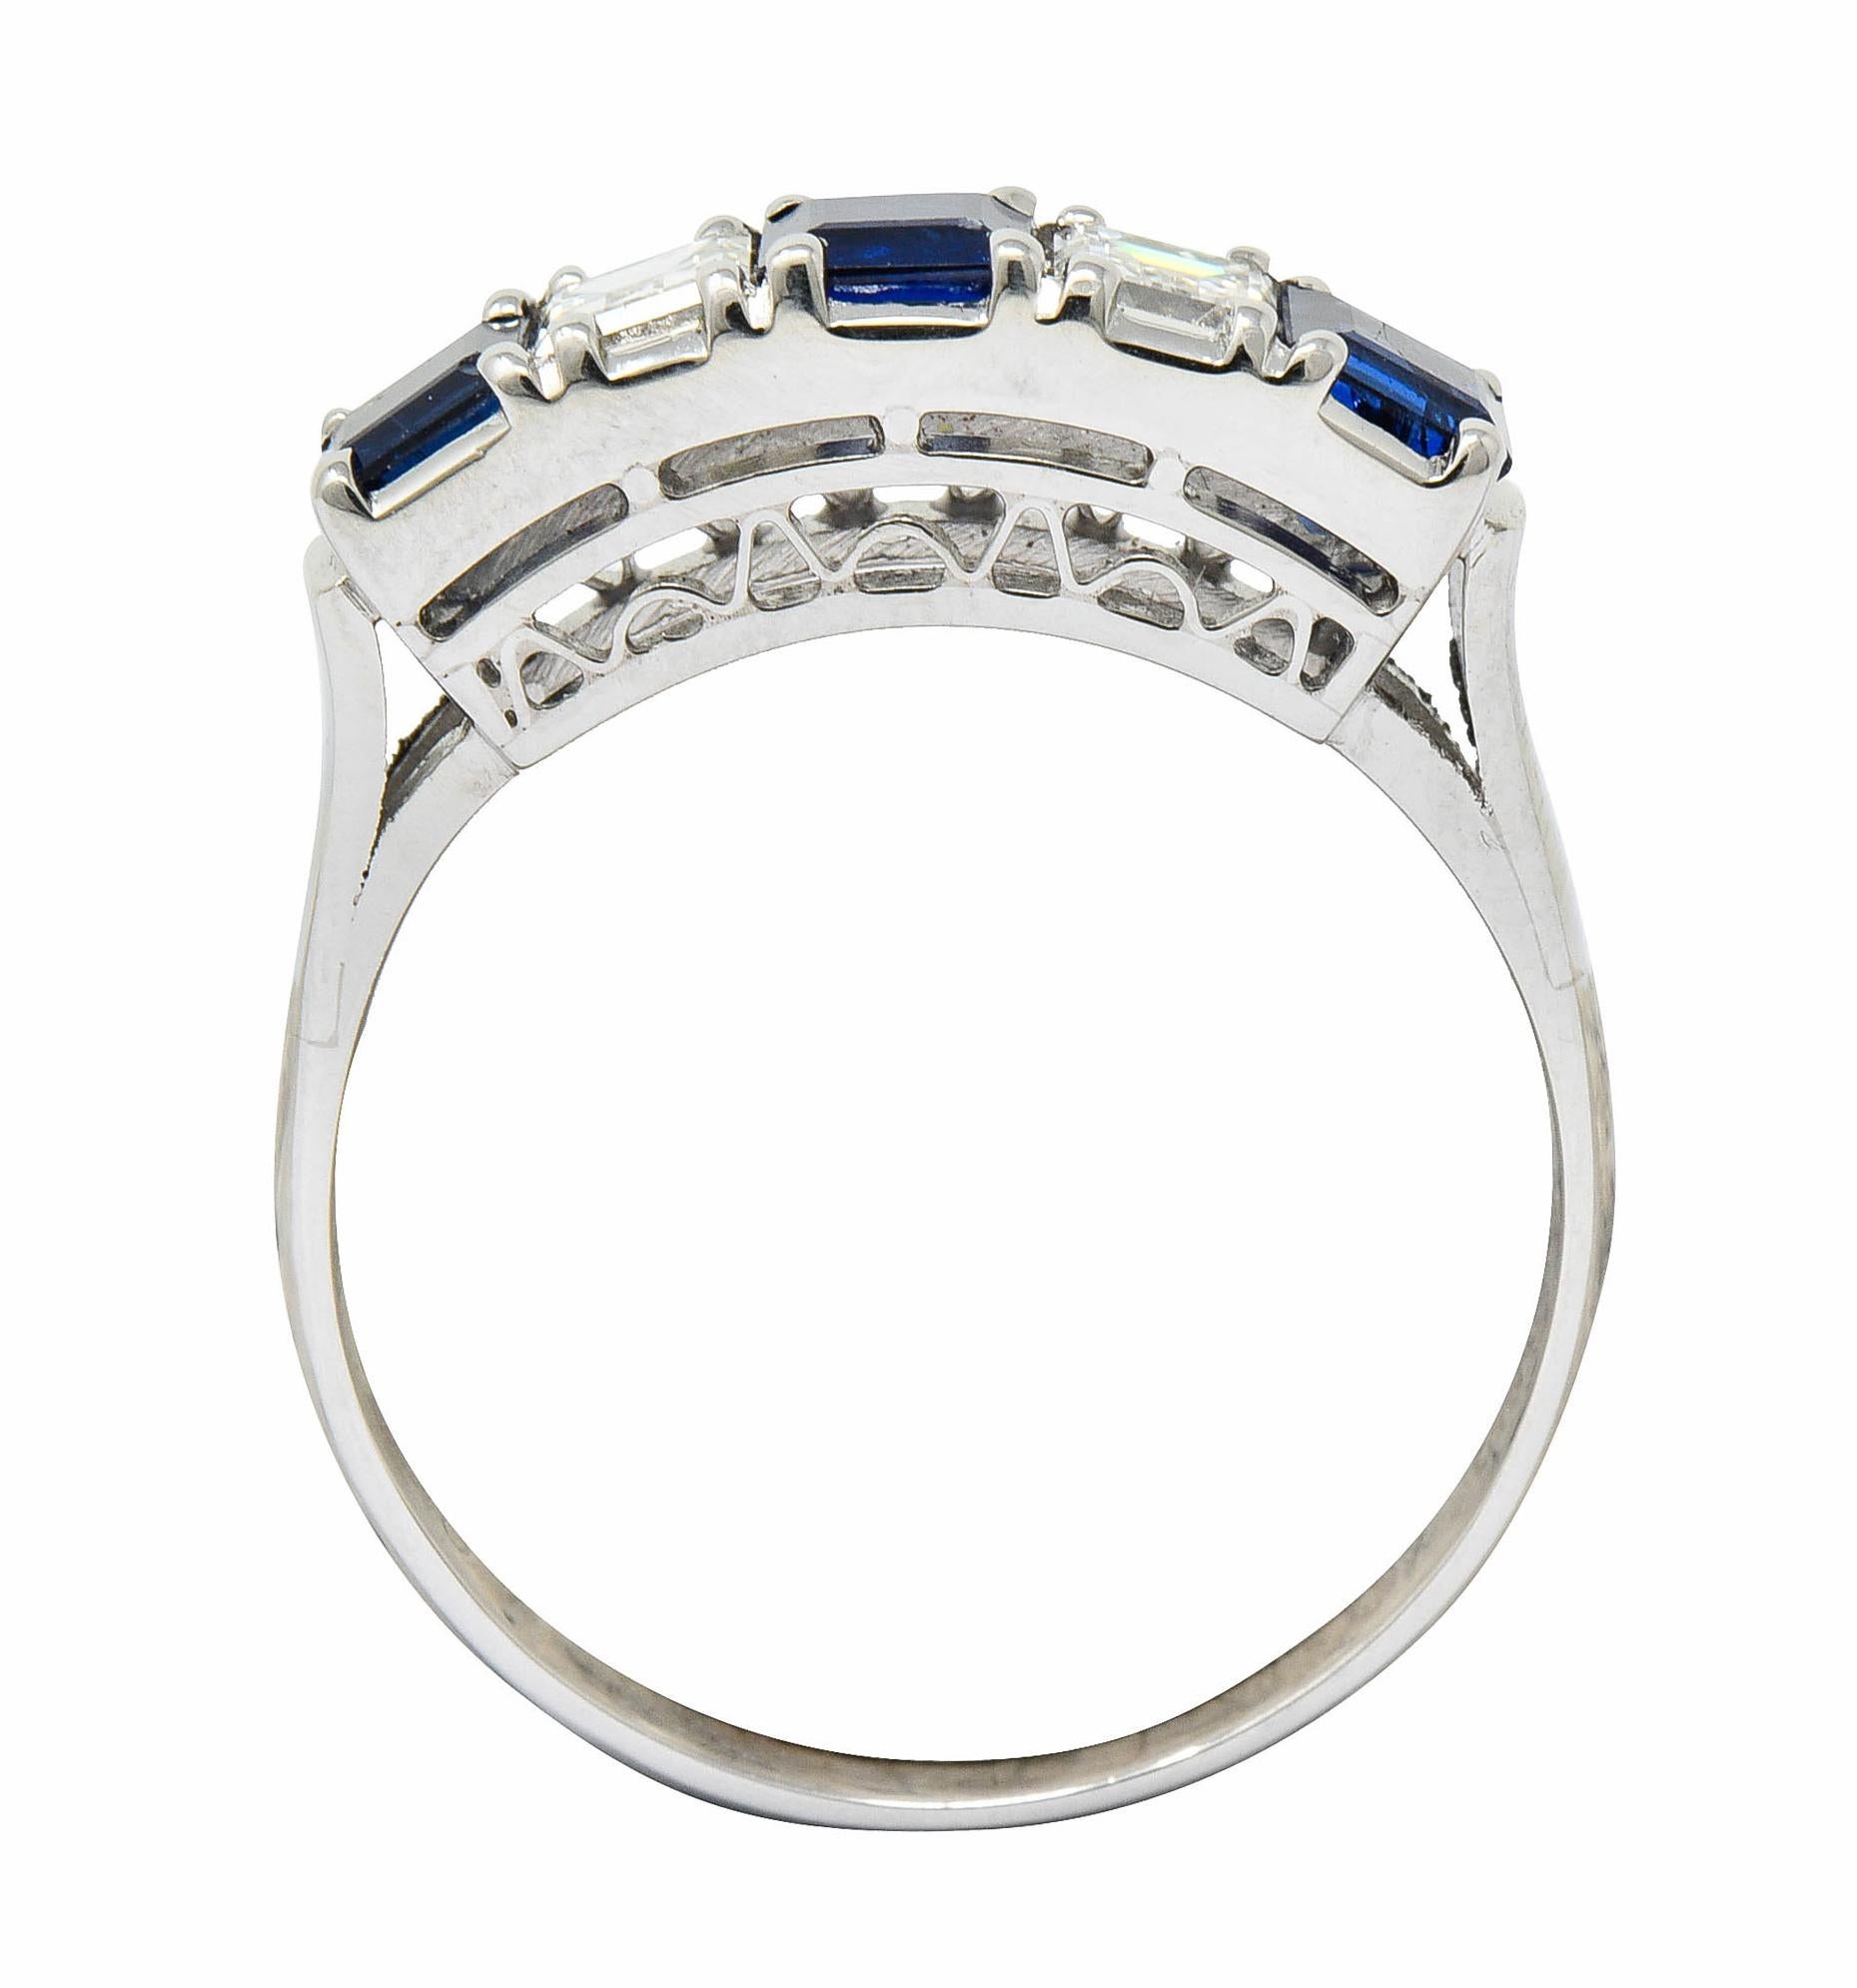 Band ring is set to front by rectangular cut sapphire and rectangular step cut diamonds

Sapphires are a well-matched medium-dark royal blue and weigh in total approximately 0.91 carat

Alternating with diamonds weighing in total approximately 0.40